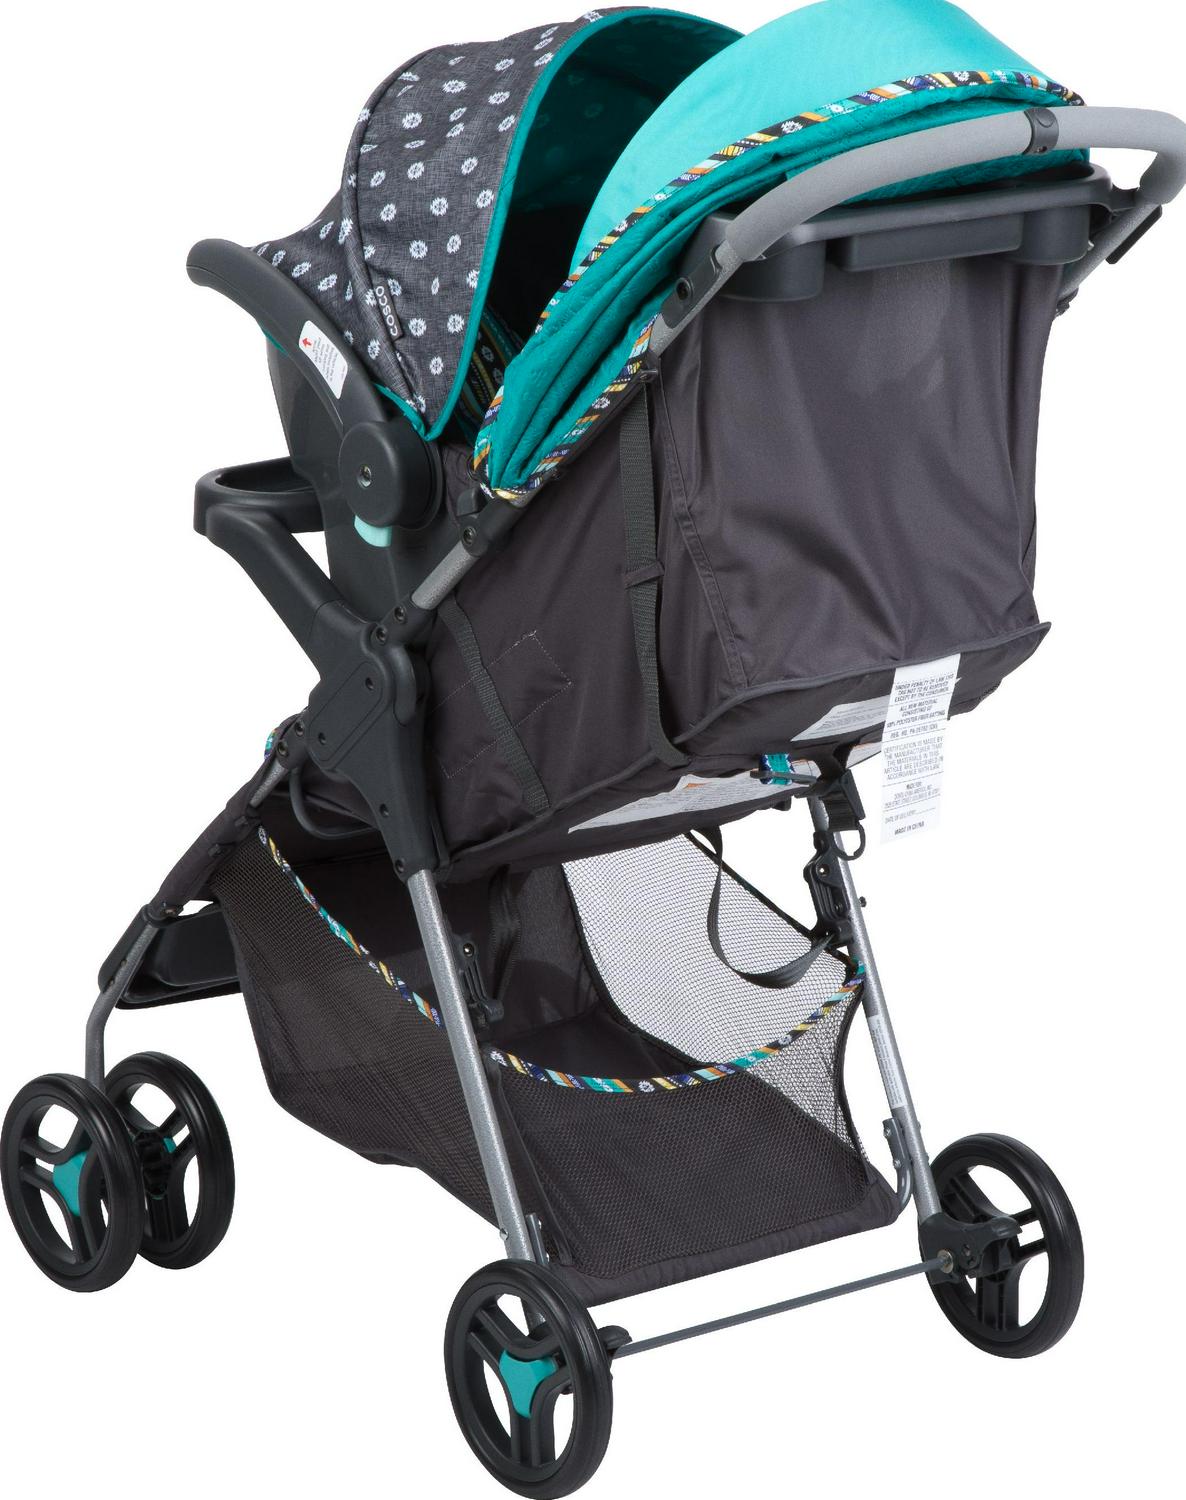 Child Stroller Multi-Position Reclining Seat Travel System Stroller Feather Boho 